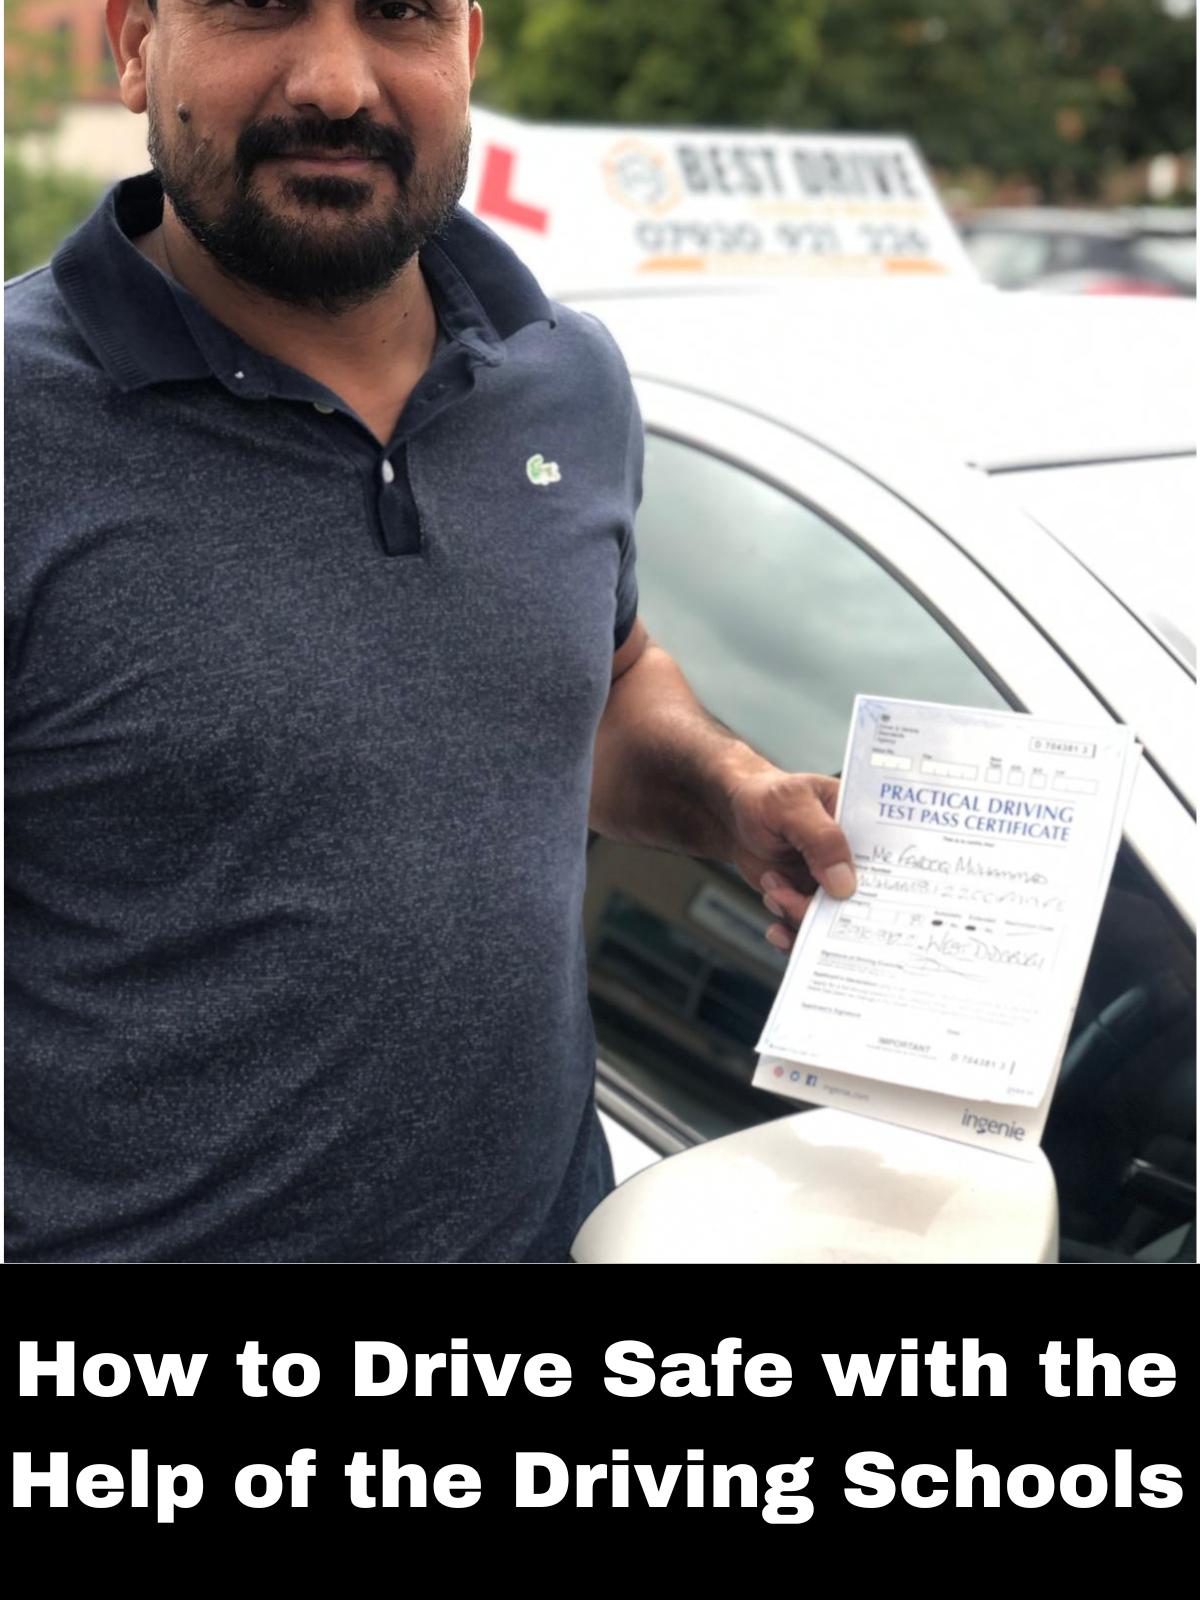 How to Drive Safe with the Help of the Driving Schools